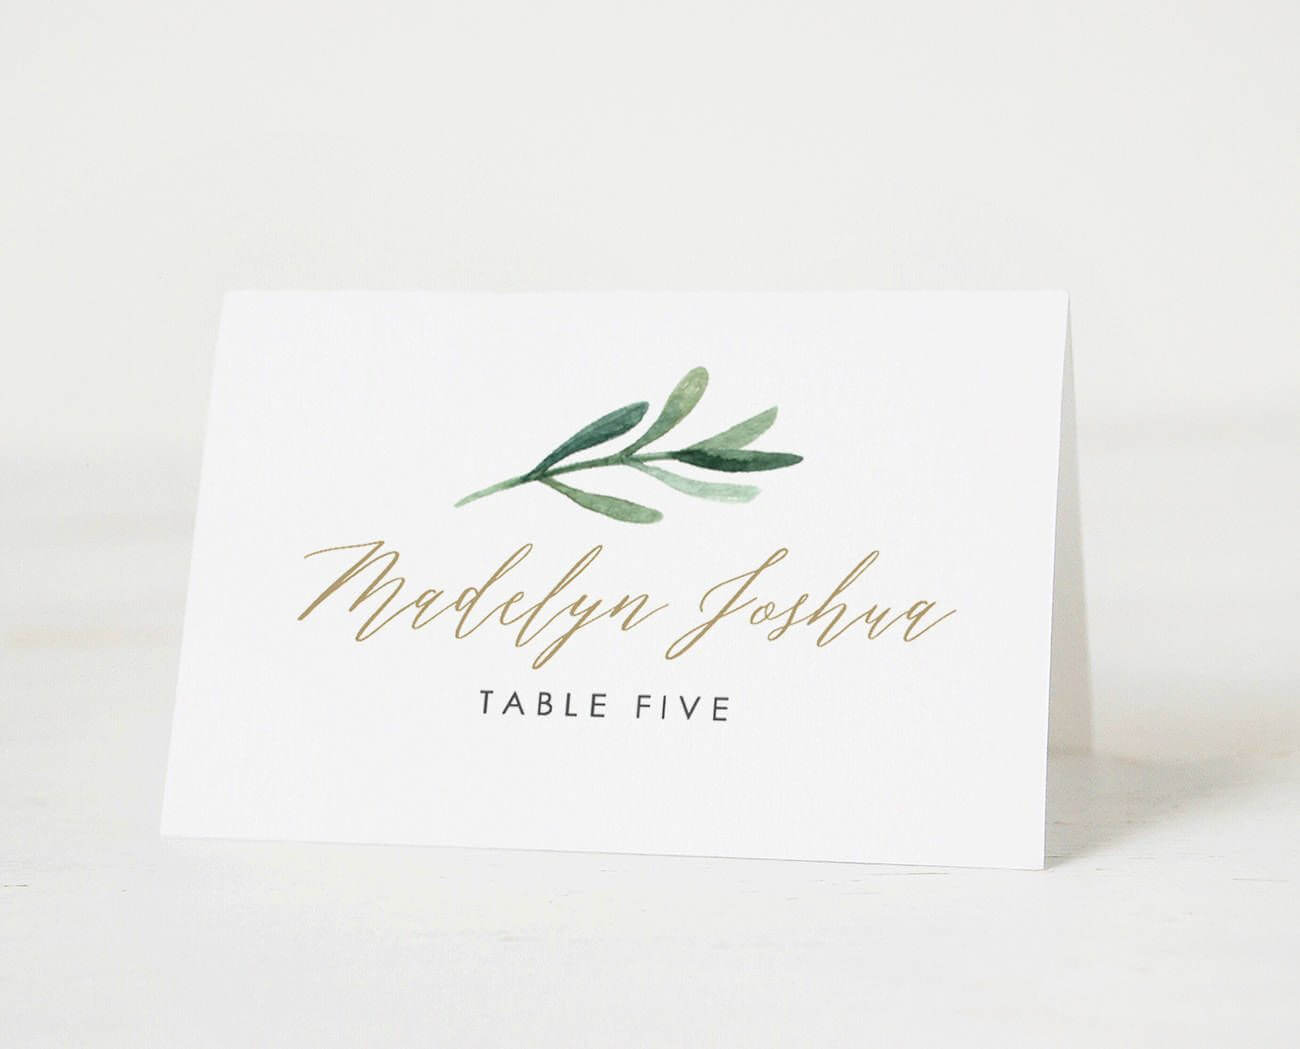 007 Place Cards Template Word Ideas Marvelous Name Christmas With Regard To Wedding Place Card Template Free Word